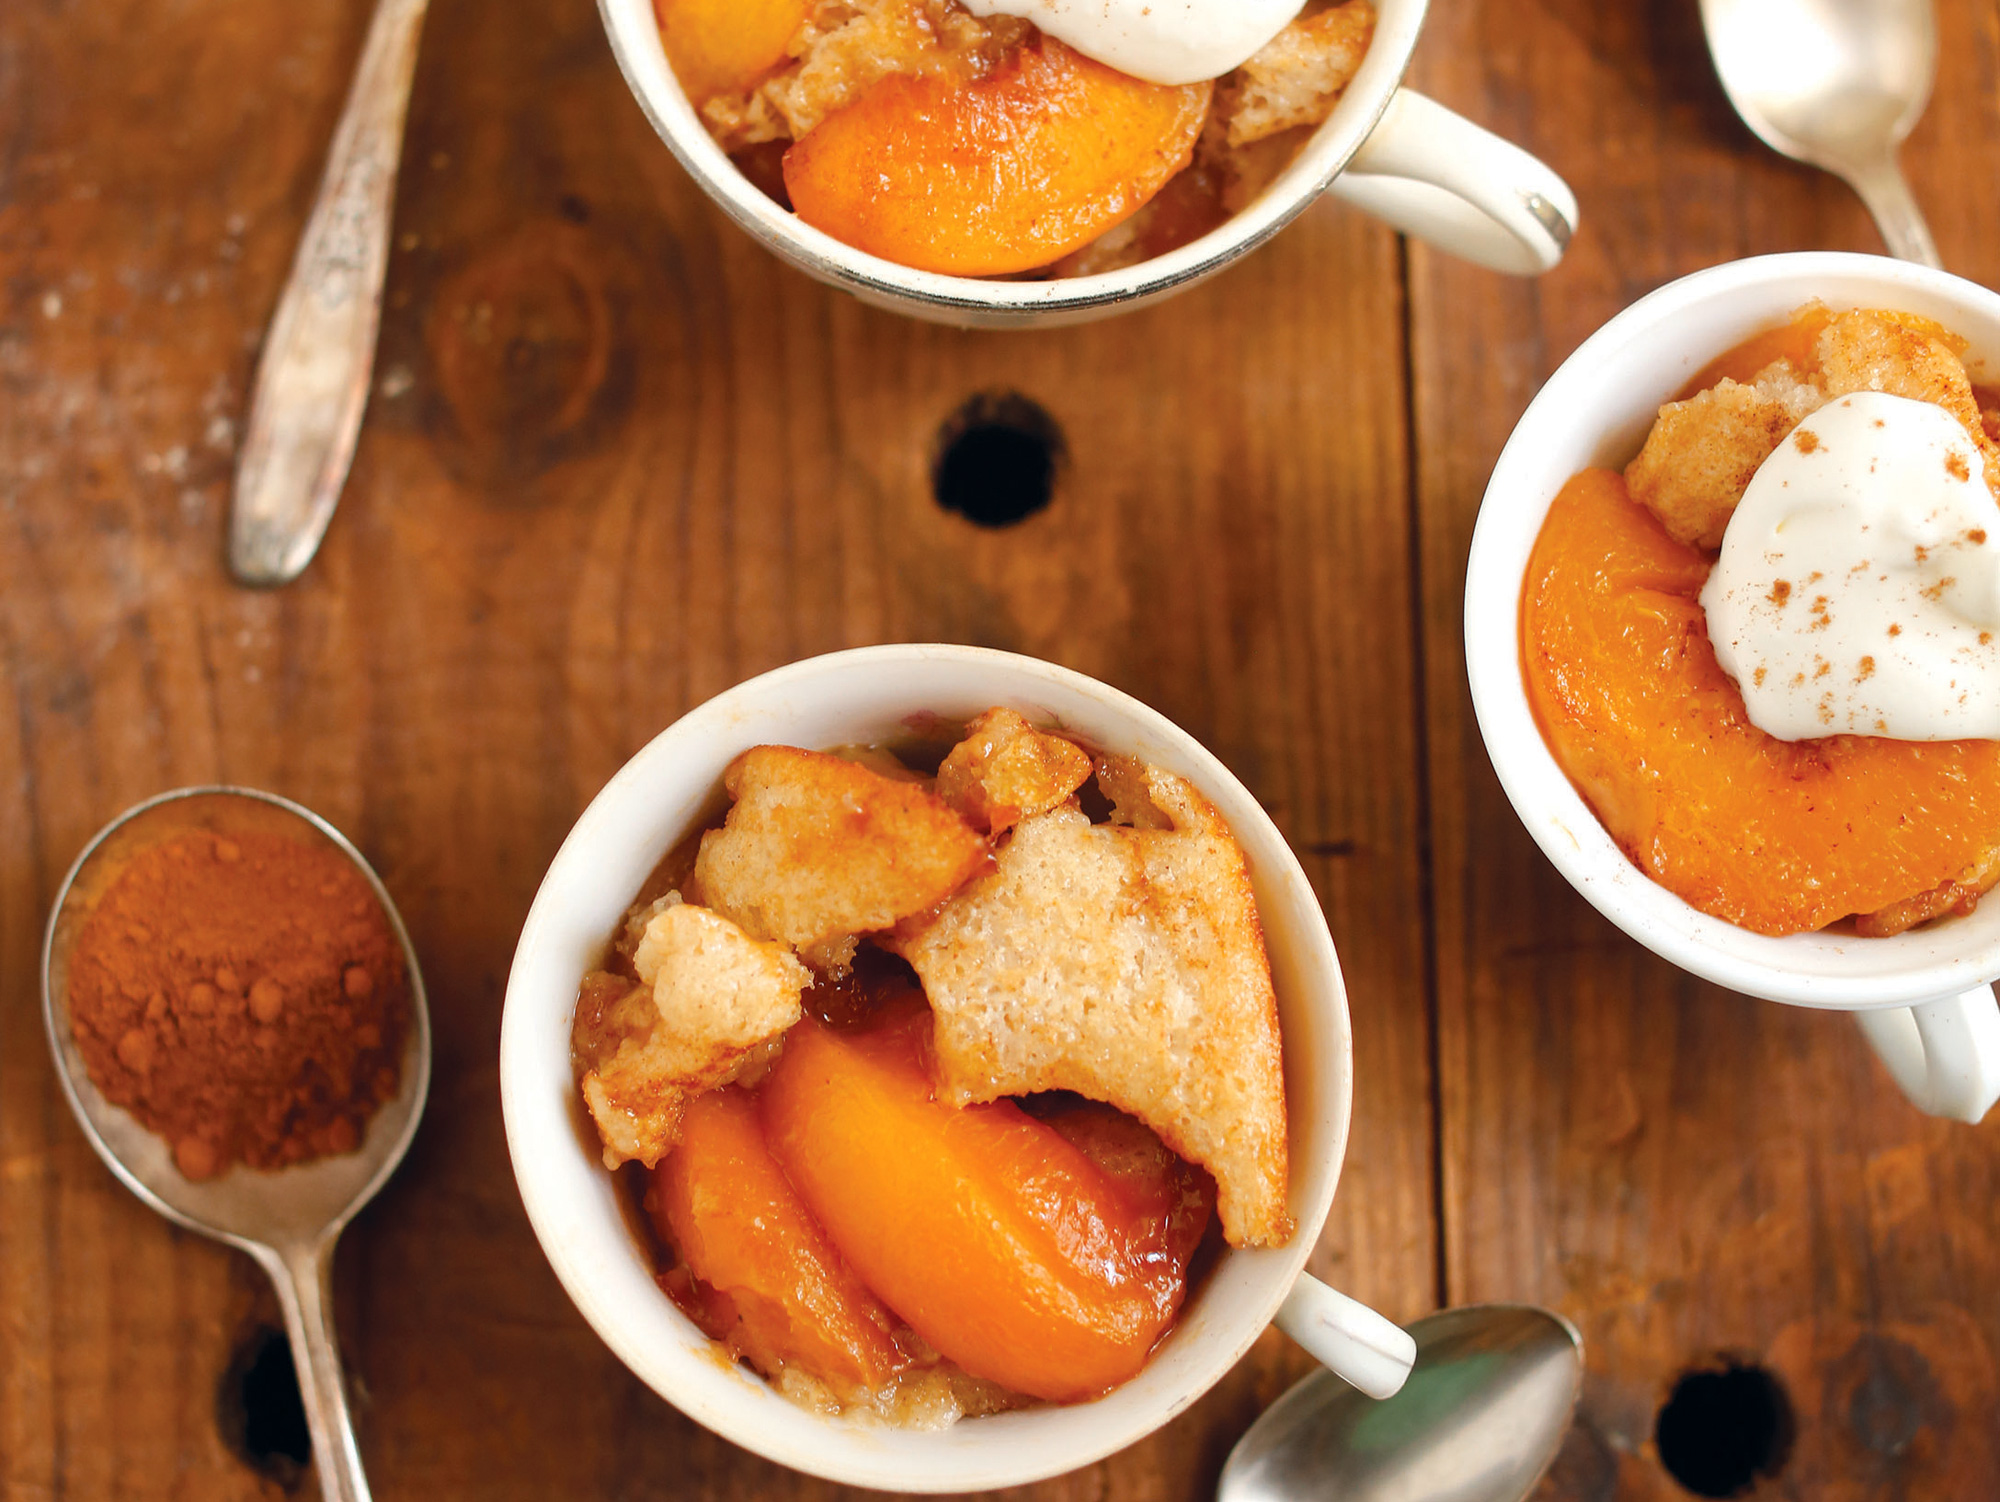 Peaches flavored with sweet tea put a new spin on peach cobbler.